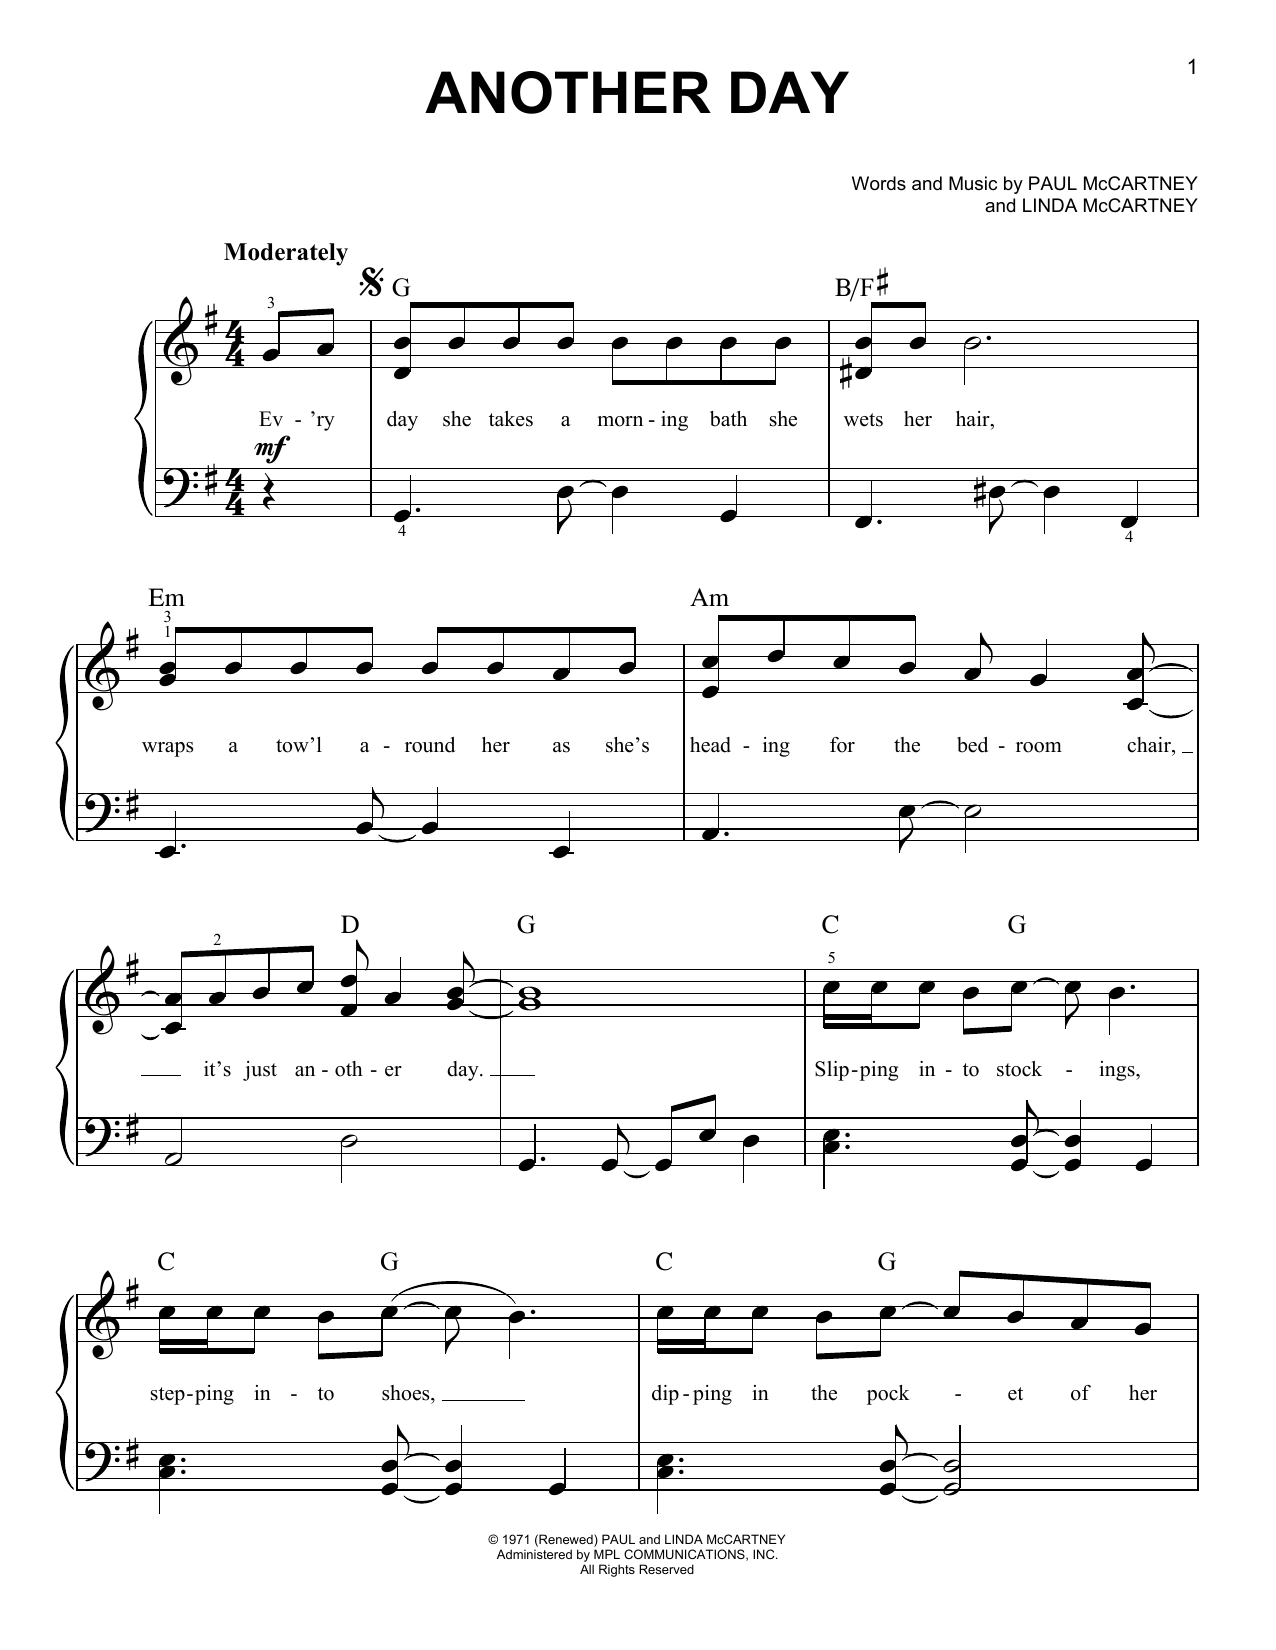 Download Paul McCartney Another Day Sheet Music